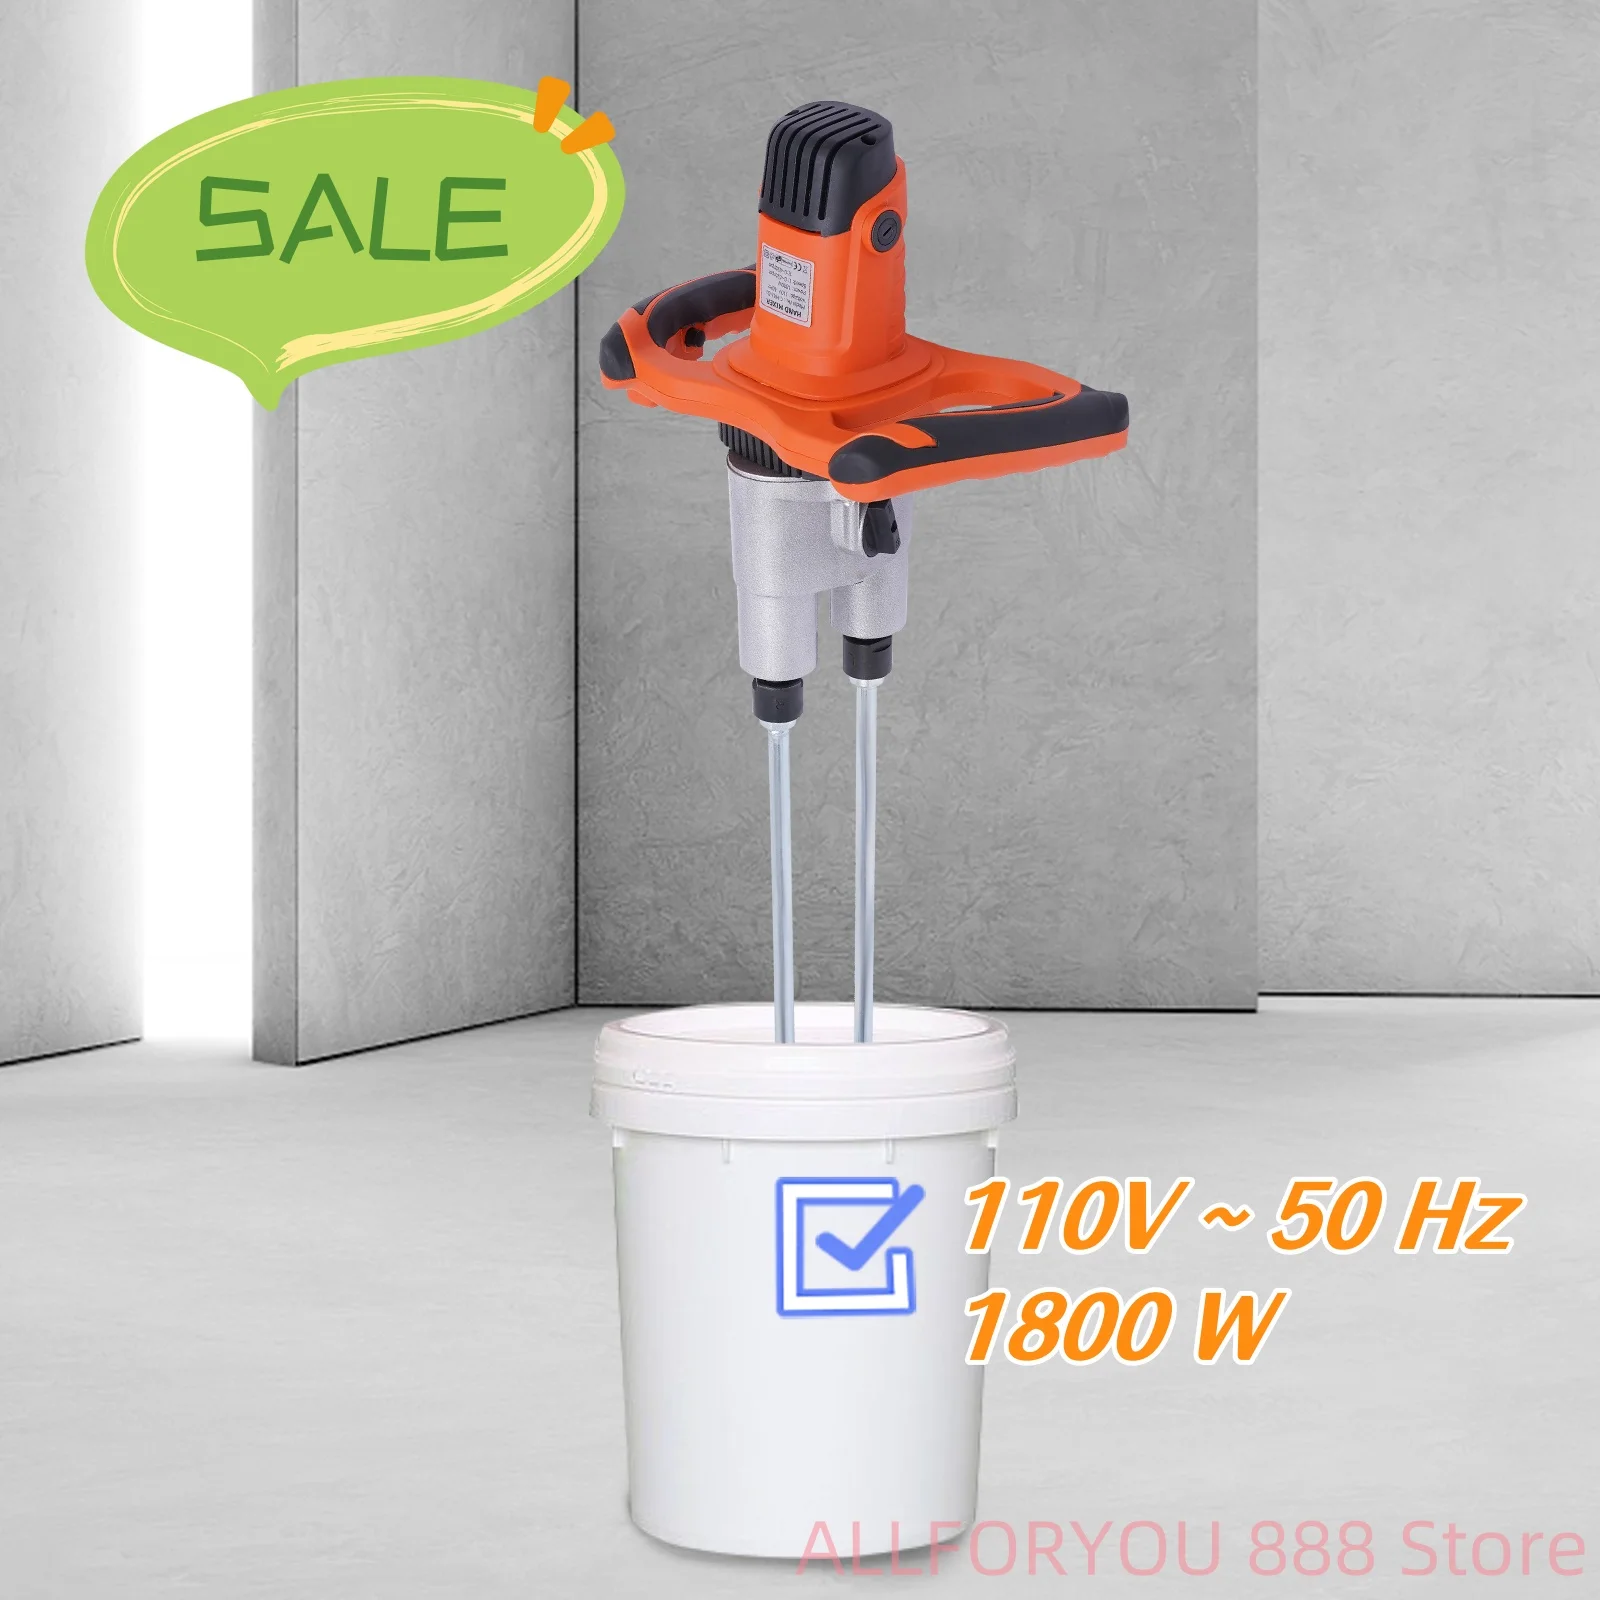 1800W Double Paddle Electric Mortar Mixer 2 Speed with Robust Aluminum Die-cast Housing Powerful and Handy